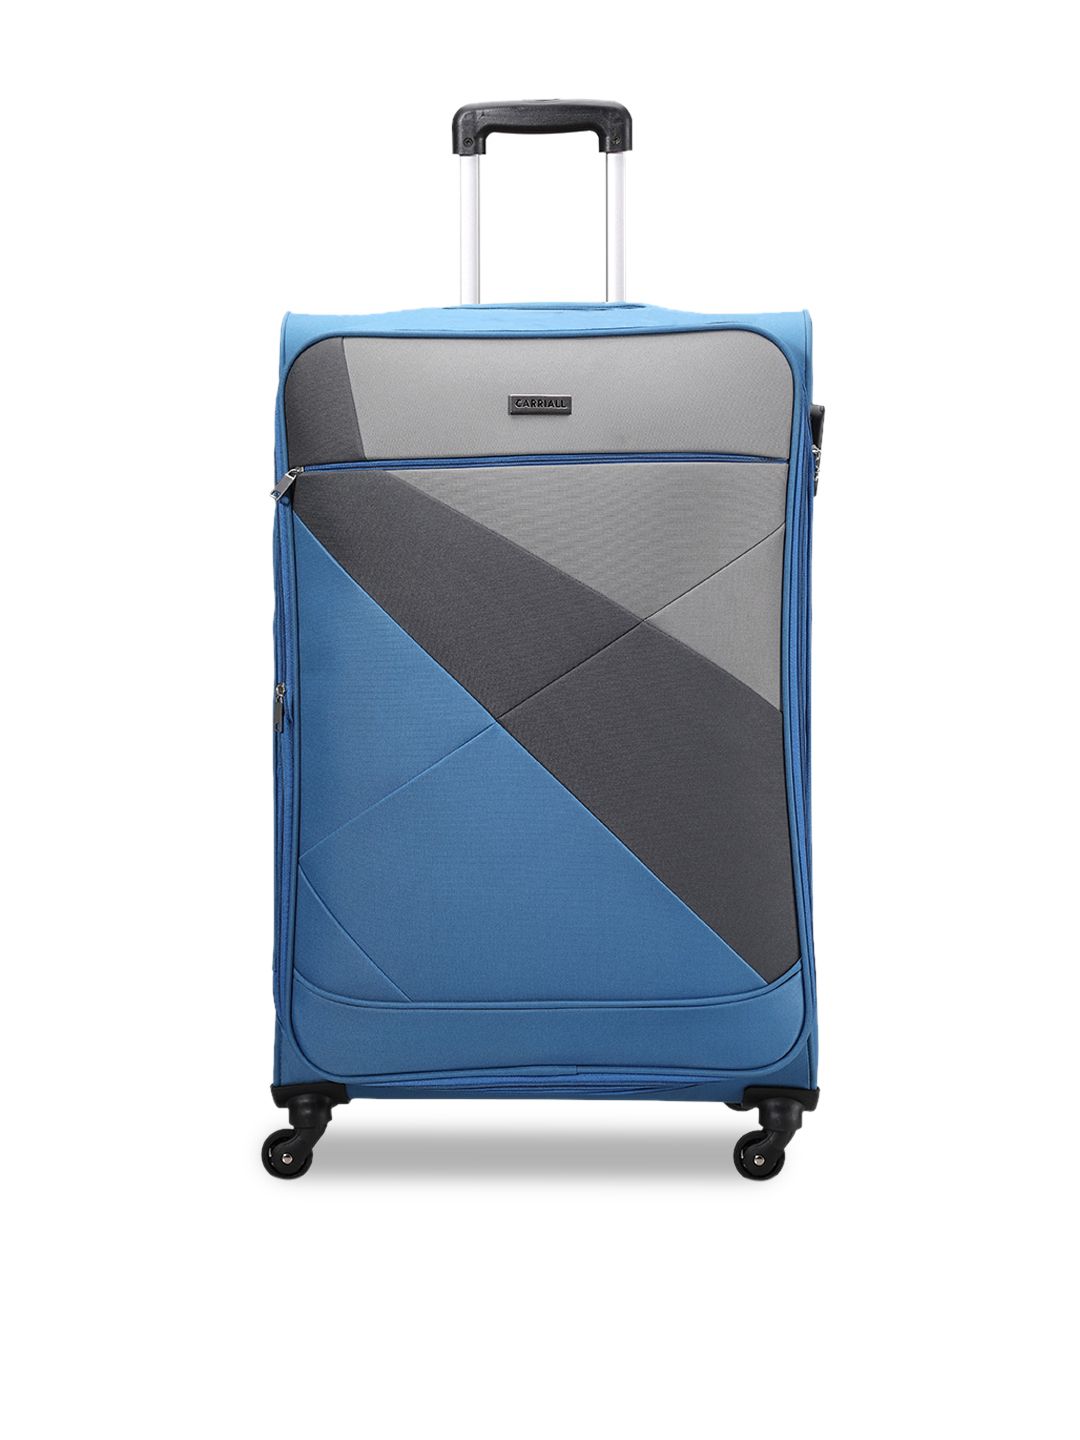 CARRIALL Blue & Grey Soft-Sided Large Trolley Suitcase Price in India